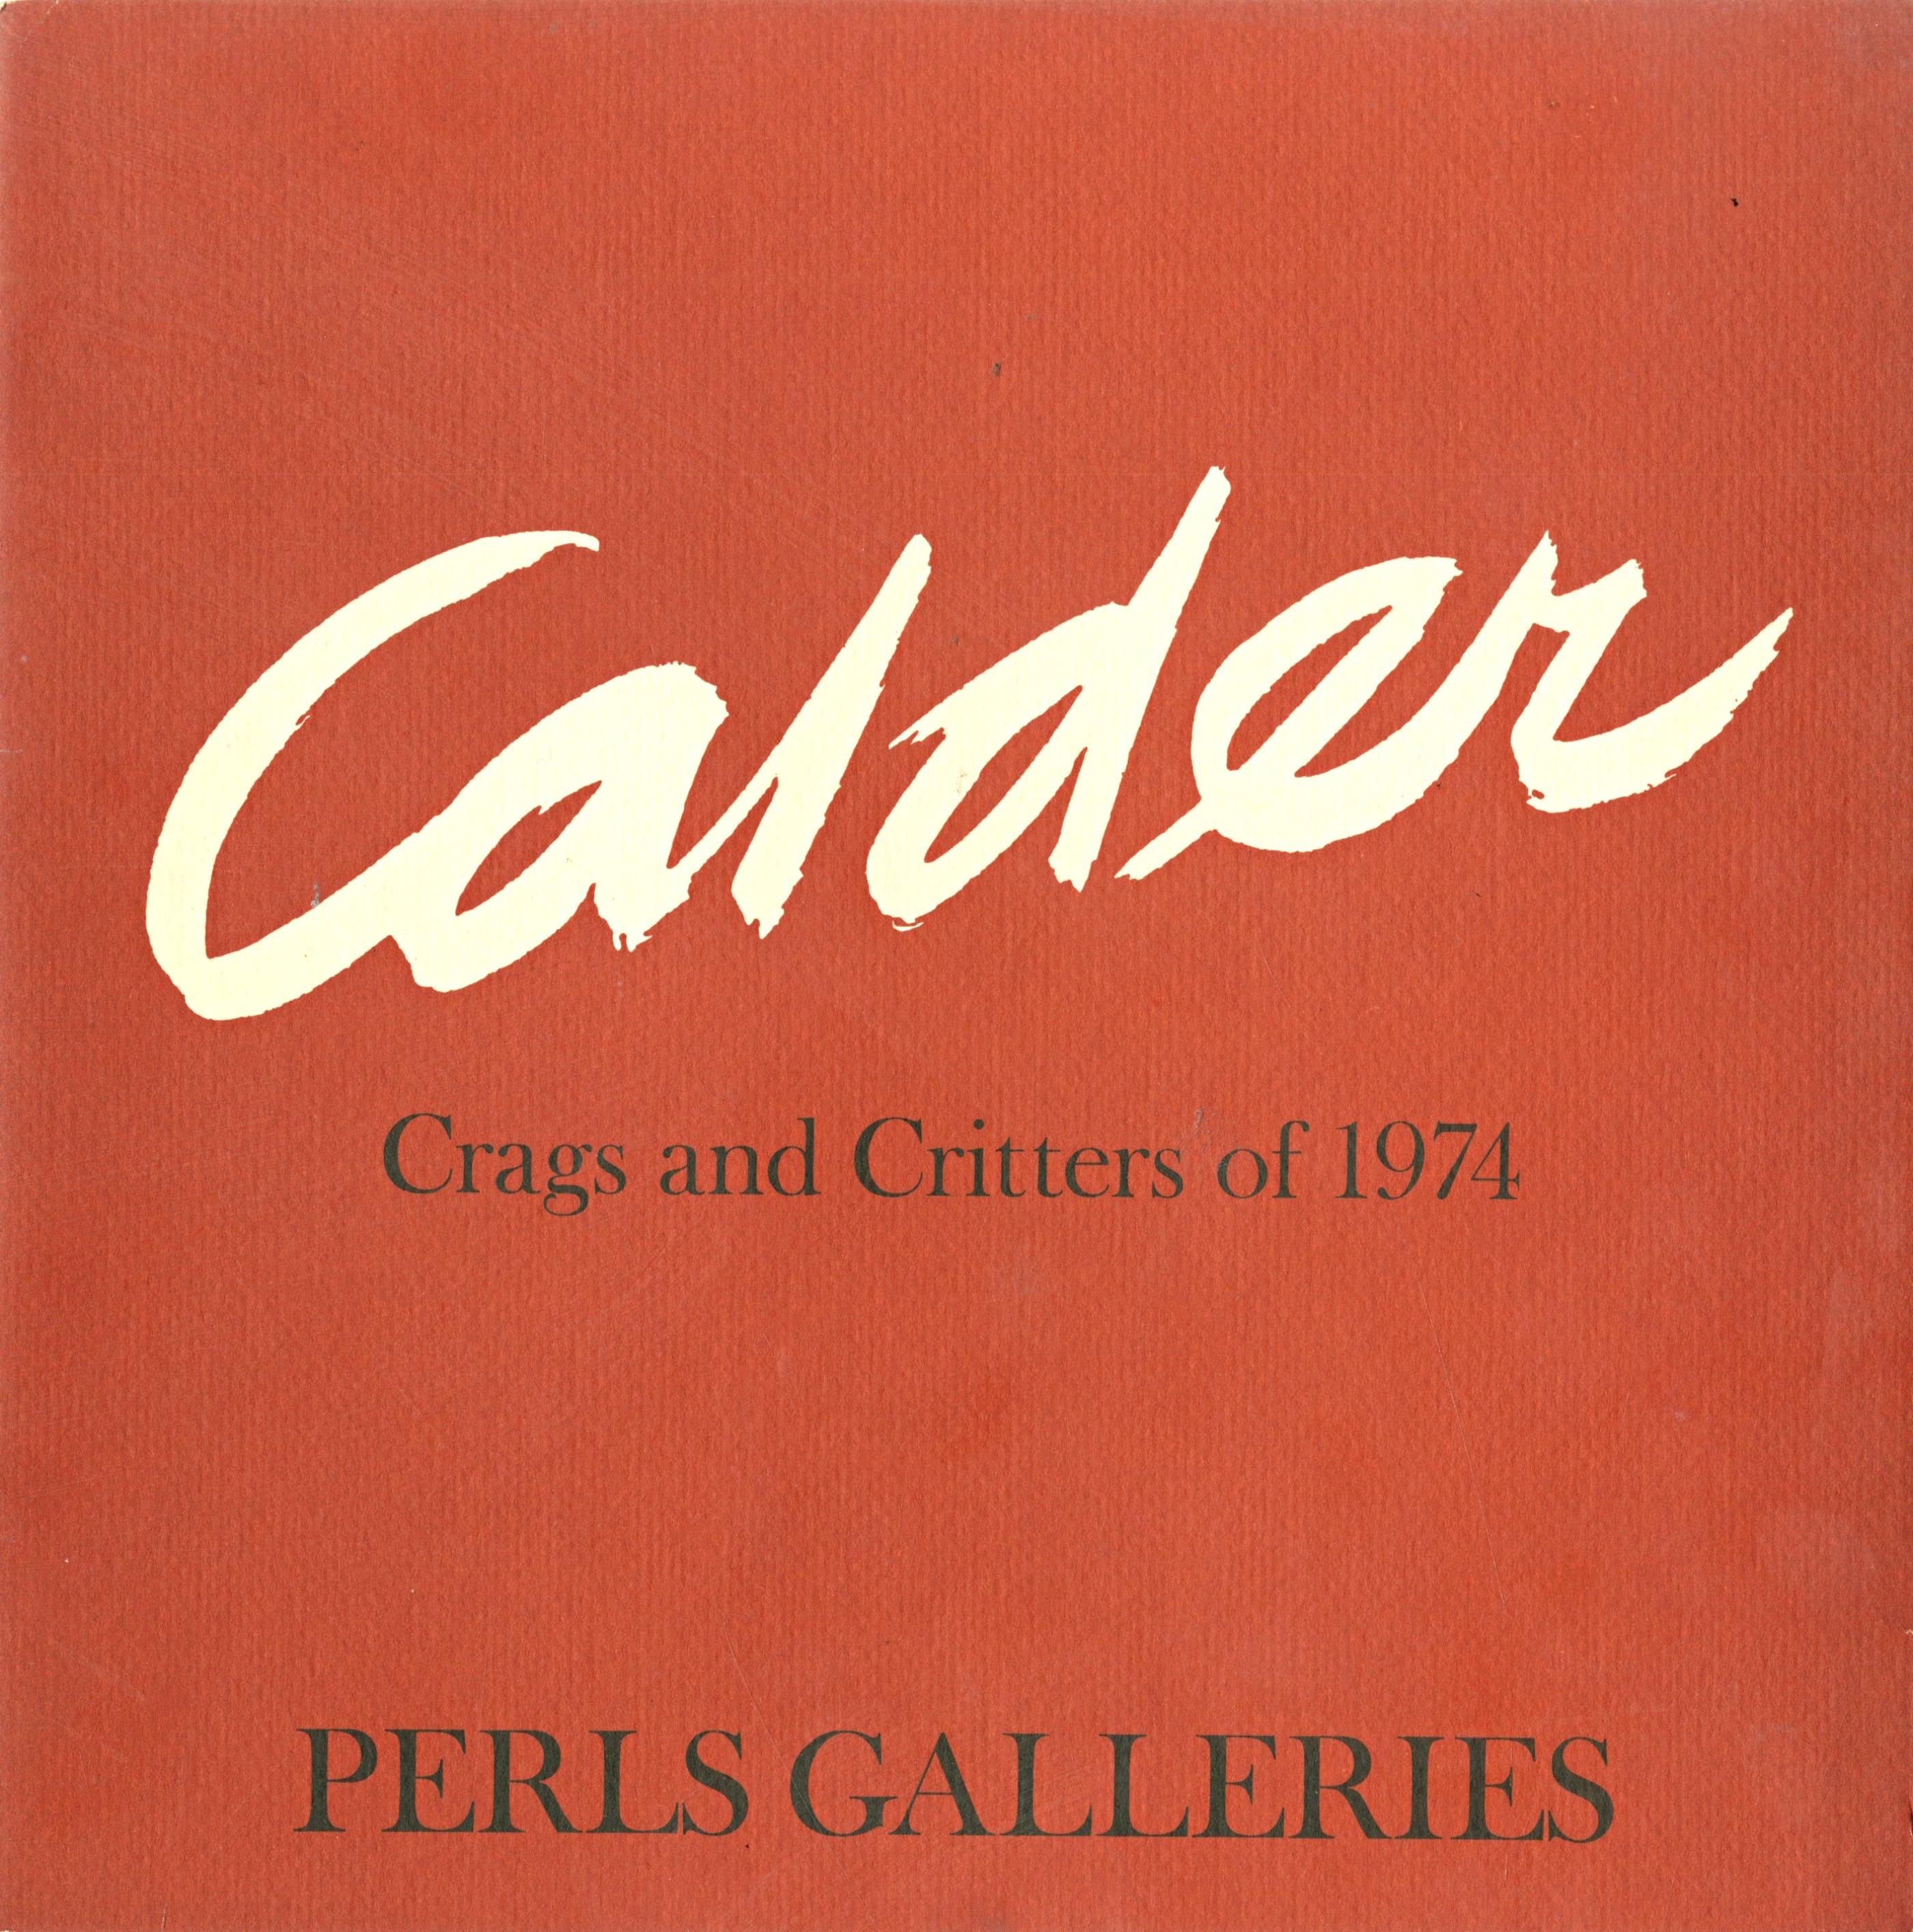 Alexander Calder
Perls Galleries Catalogue Hand Signed and Inscribed by Calder to Anita and Arthur Kahn, 1974
Exhibition catalogue, signed and inscribed in graphite pencil
9 3/5 × 9 1/4 × 1/5 inches
Signed and inscribed to Anita + Arthur Kahn Sandy